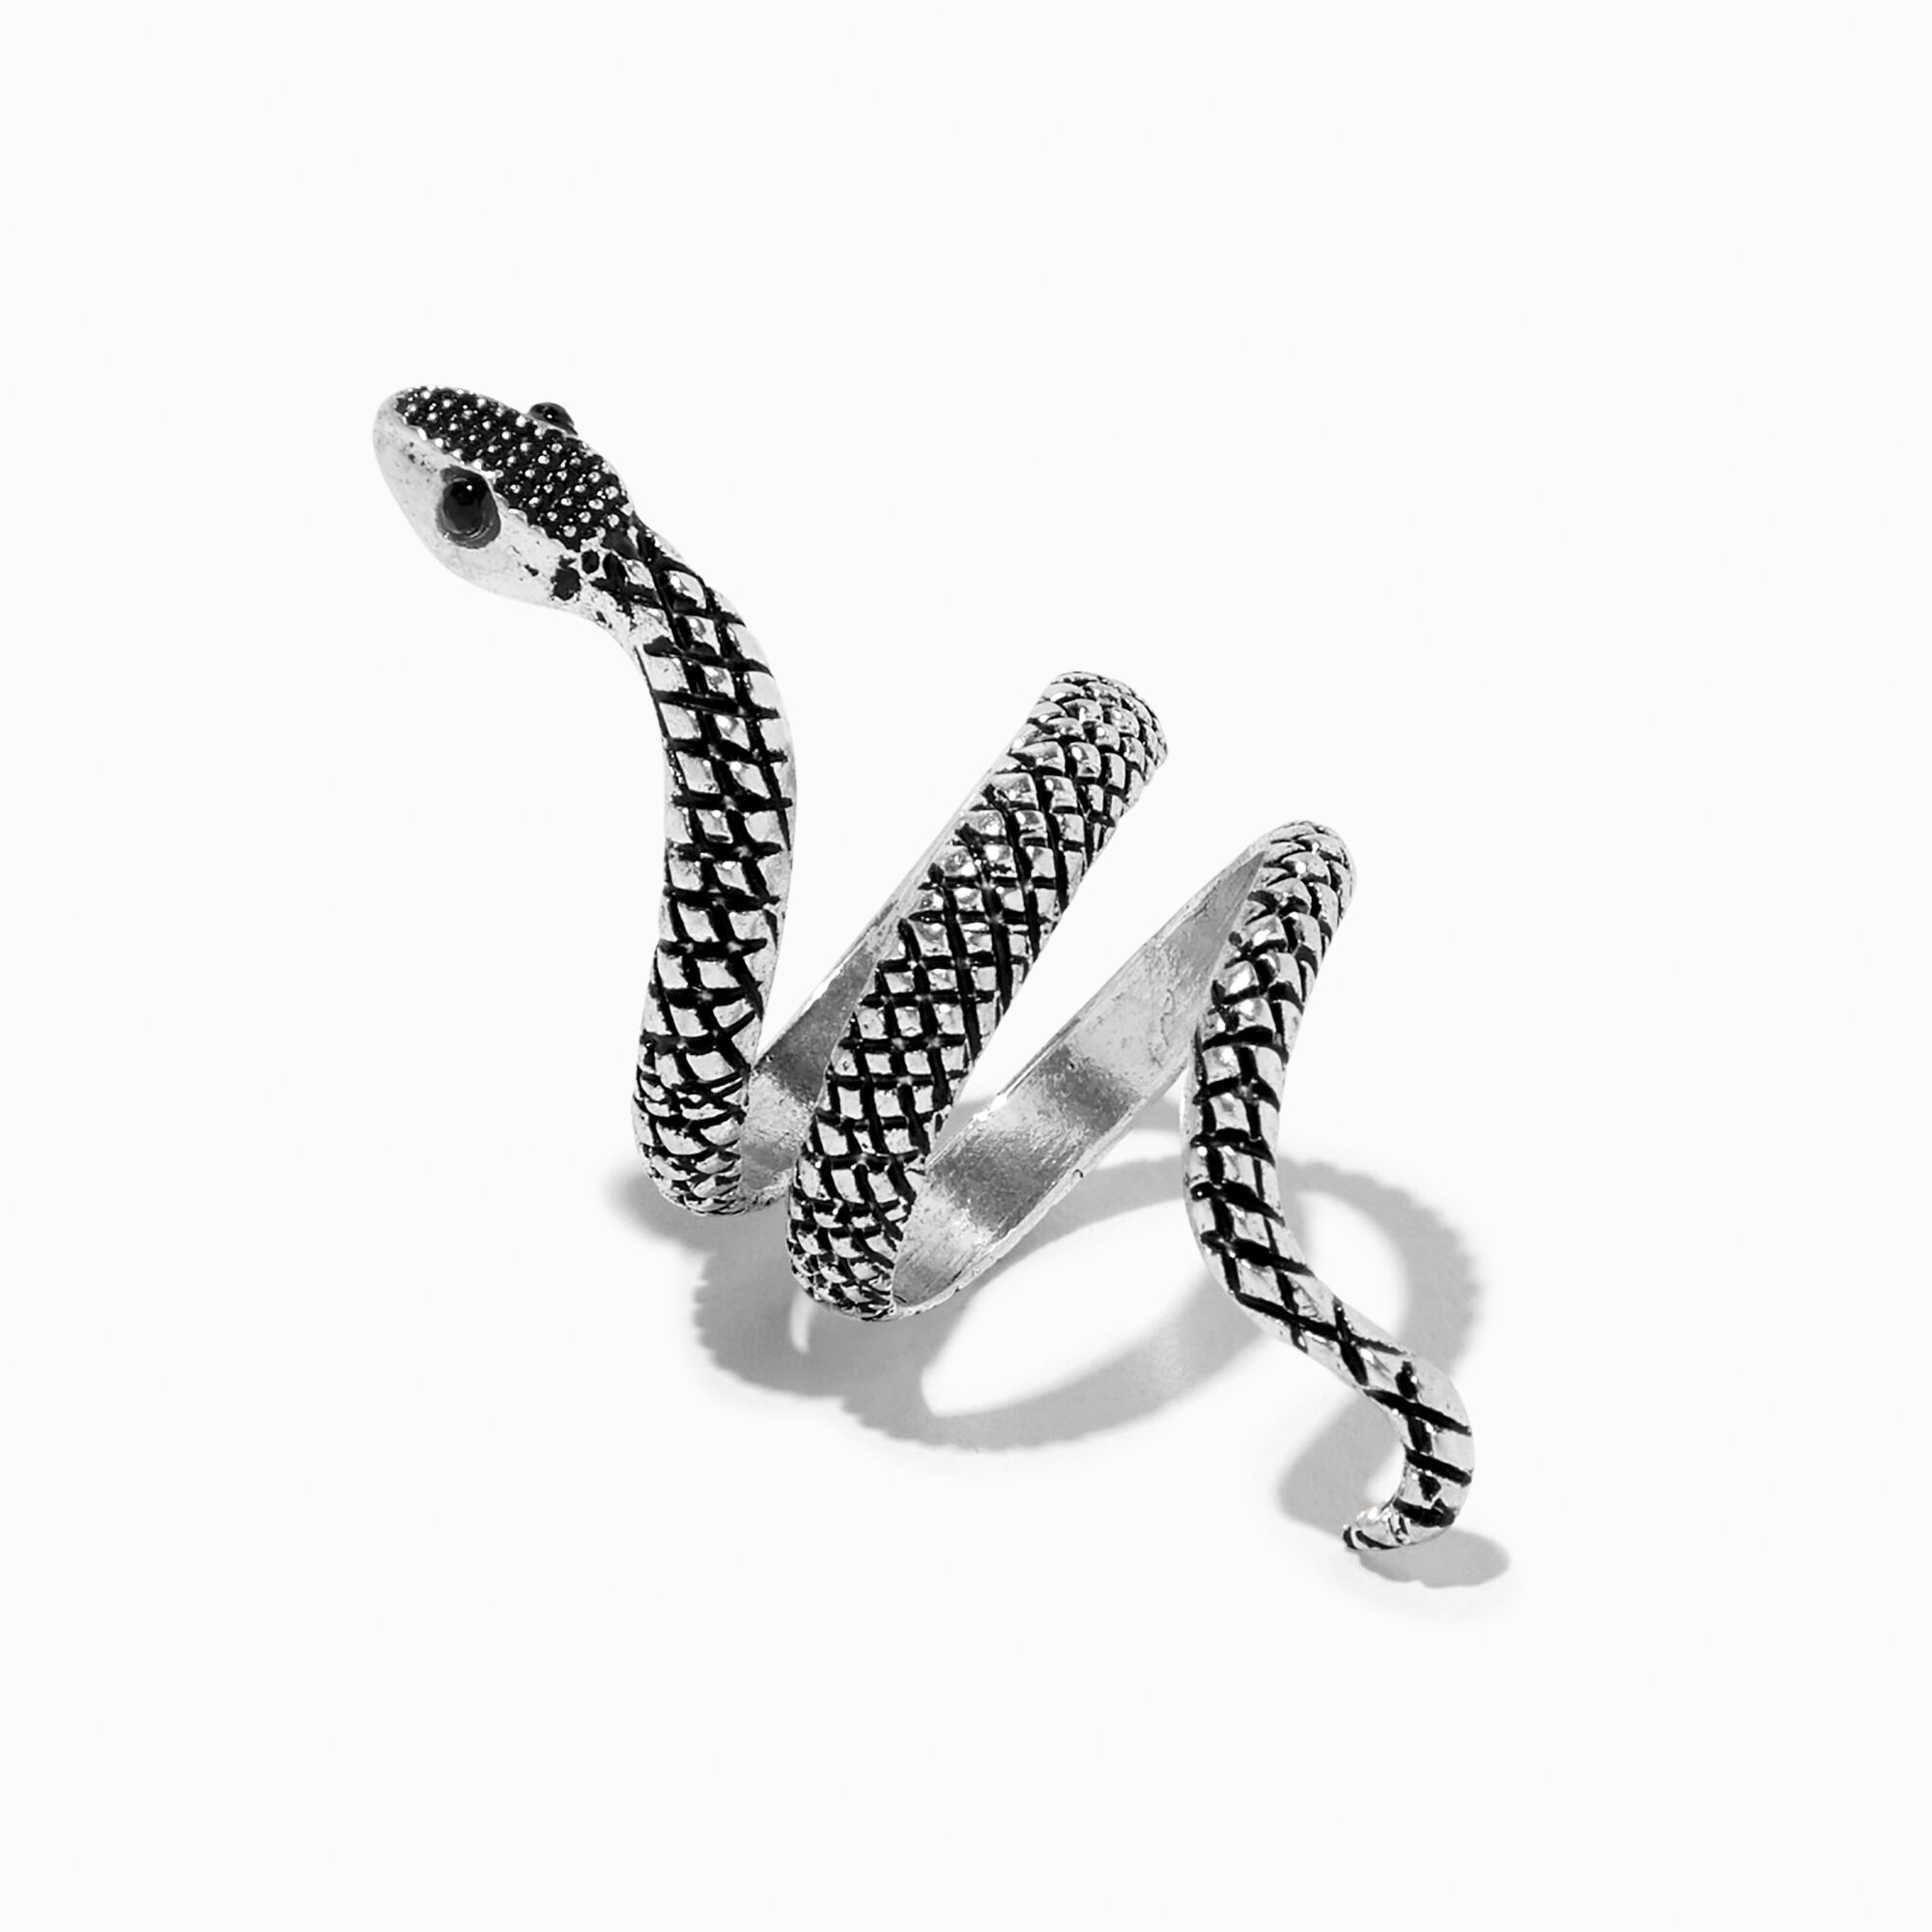 View Claires SilverTone Textured Snake Wrap Ring Black information